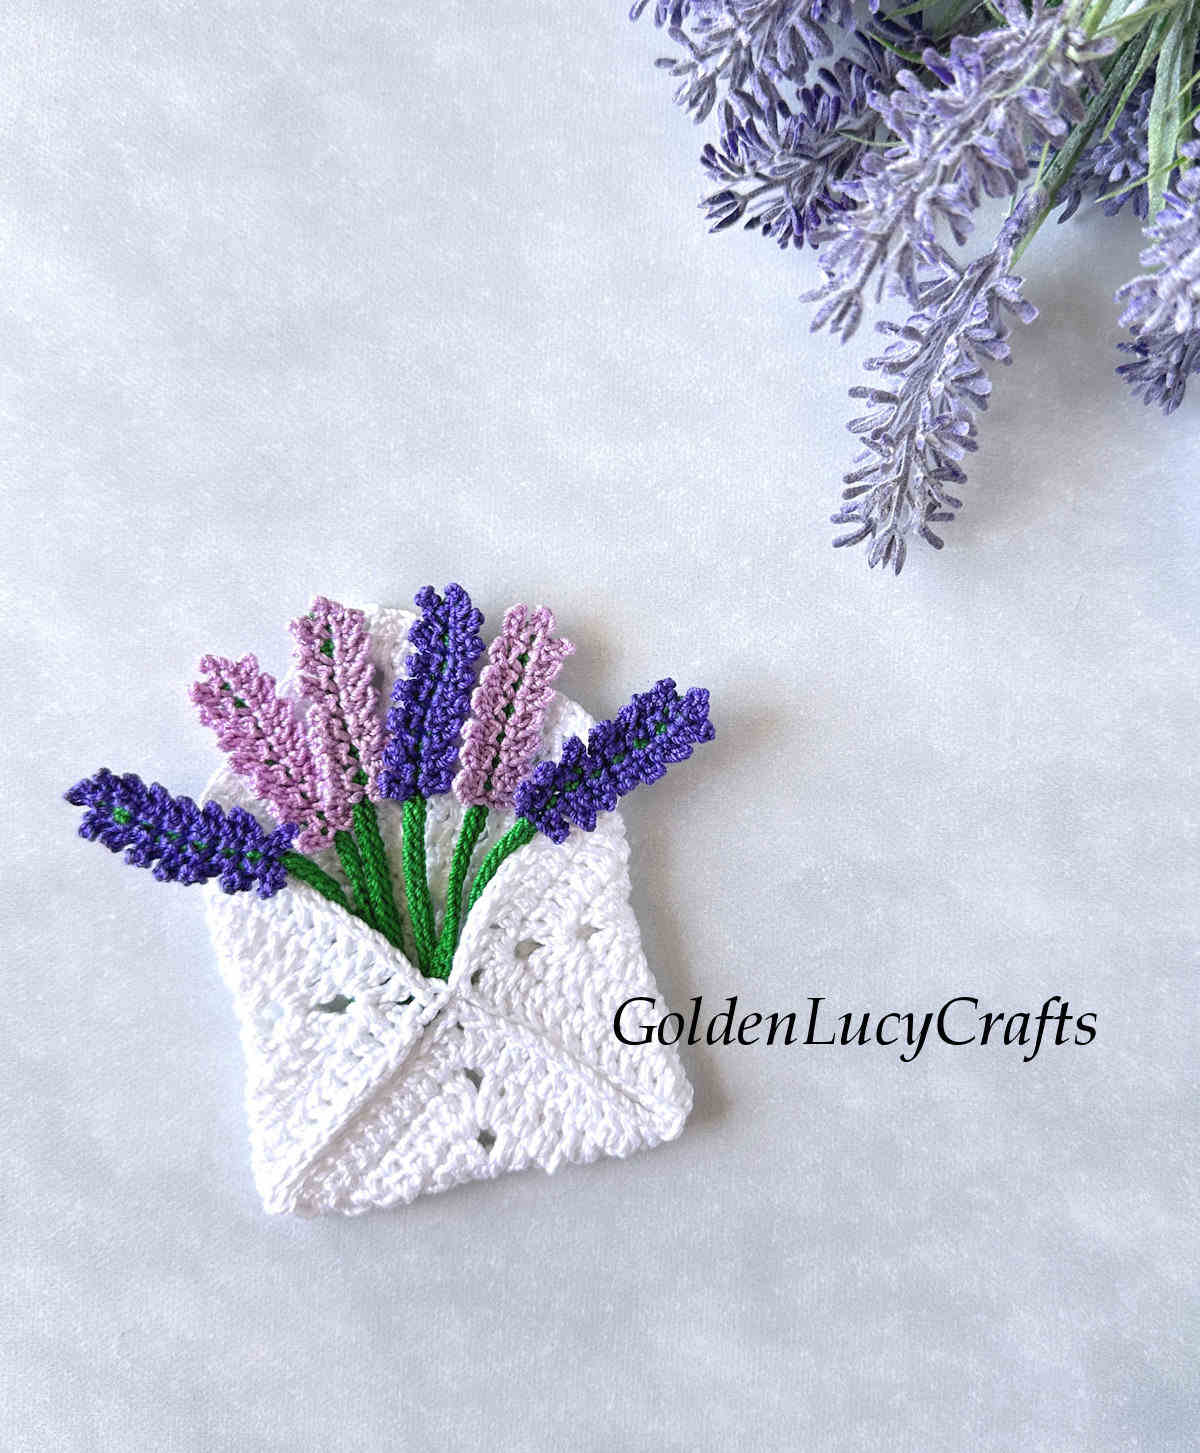 Crocheted white envelope with crocheted lavender flowers in it.